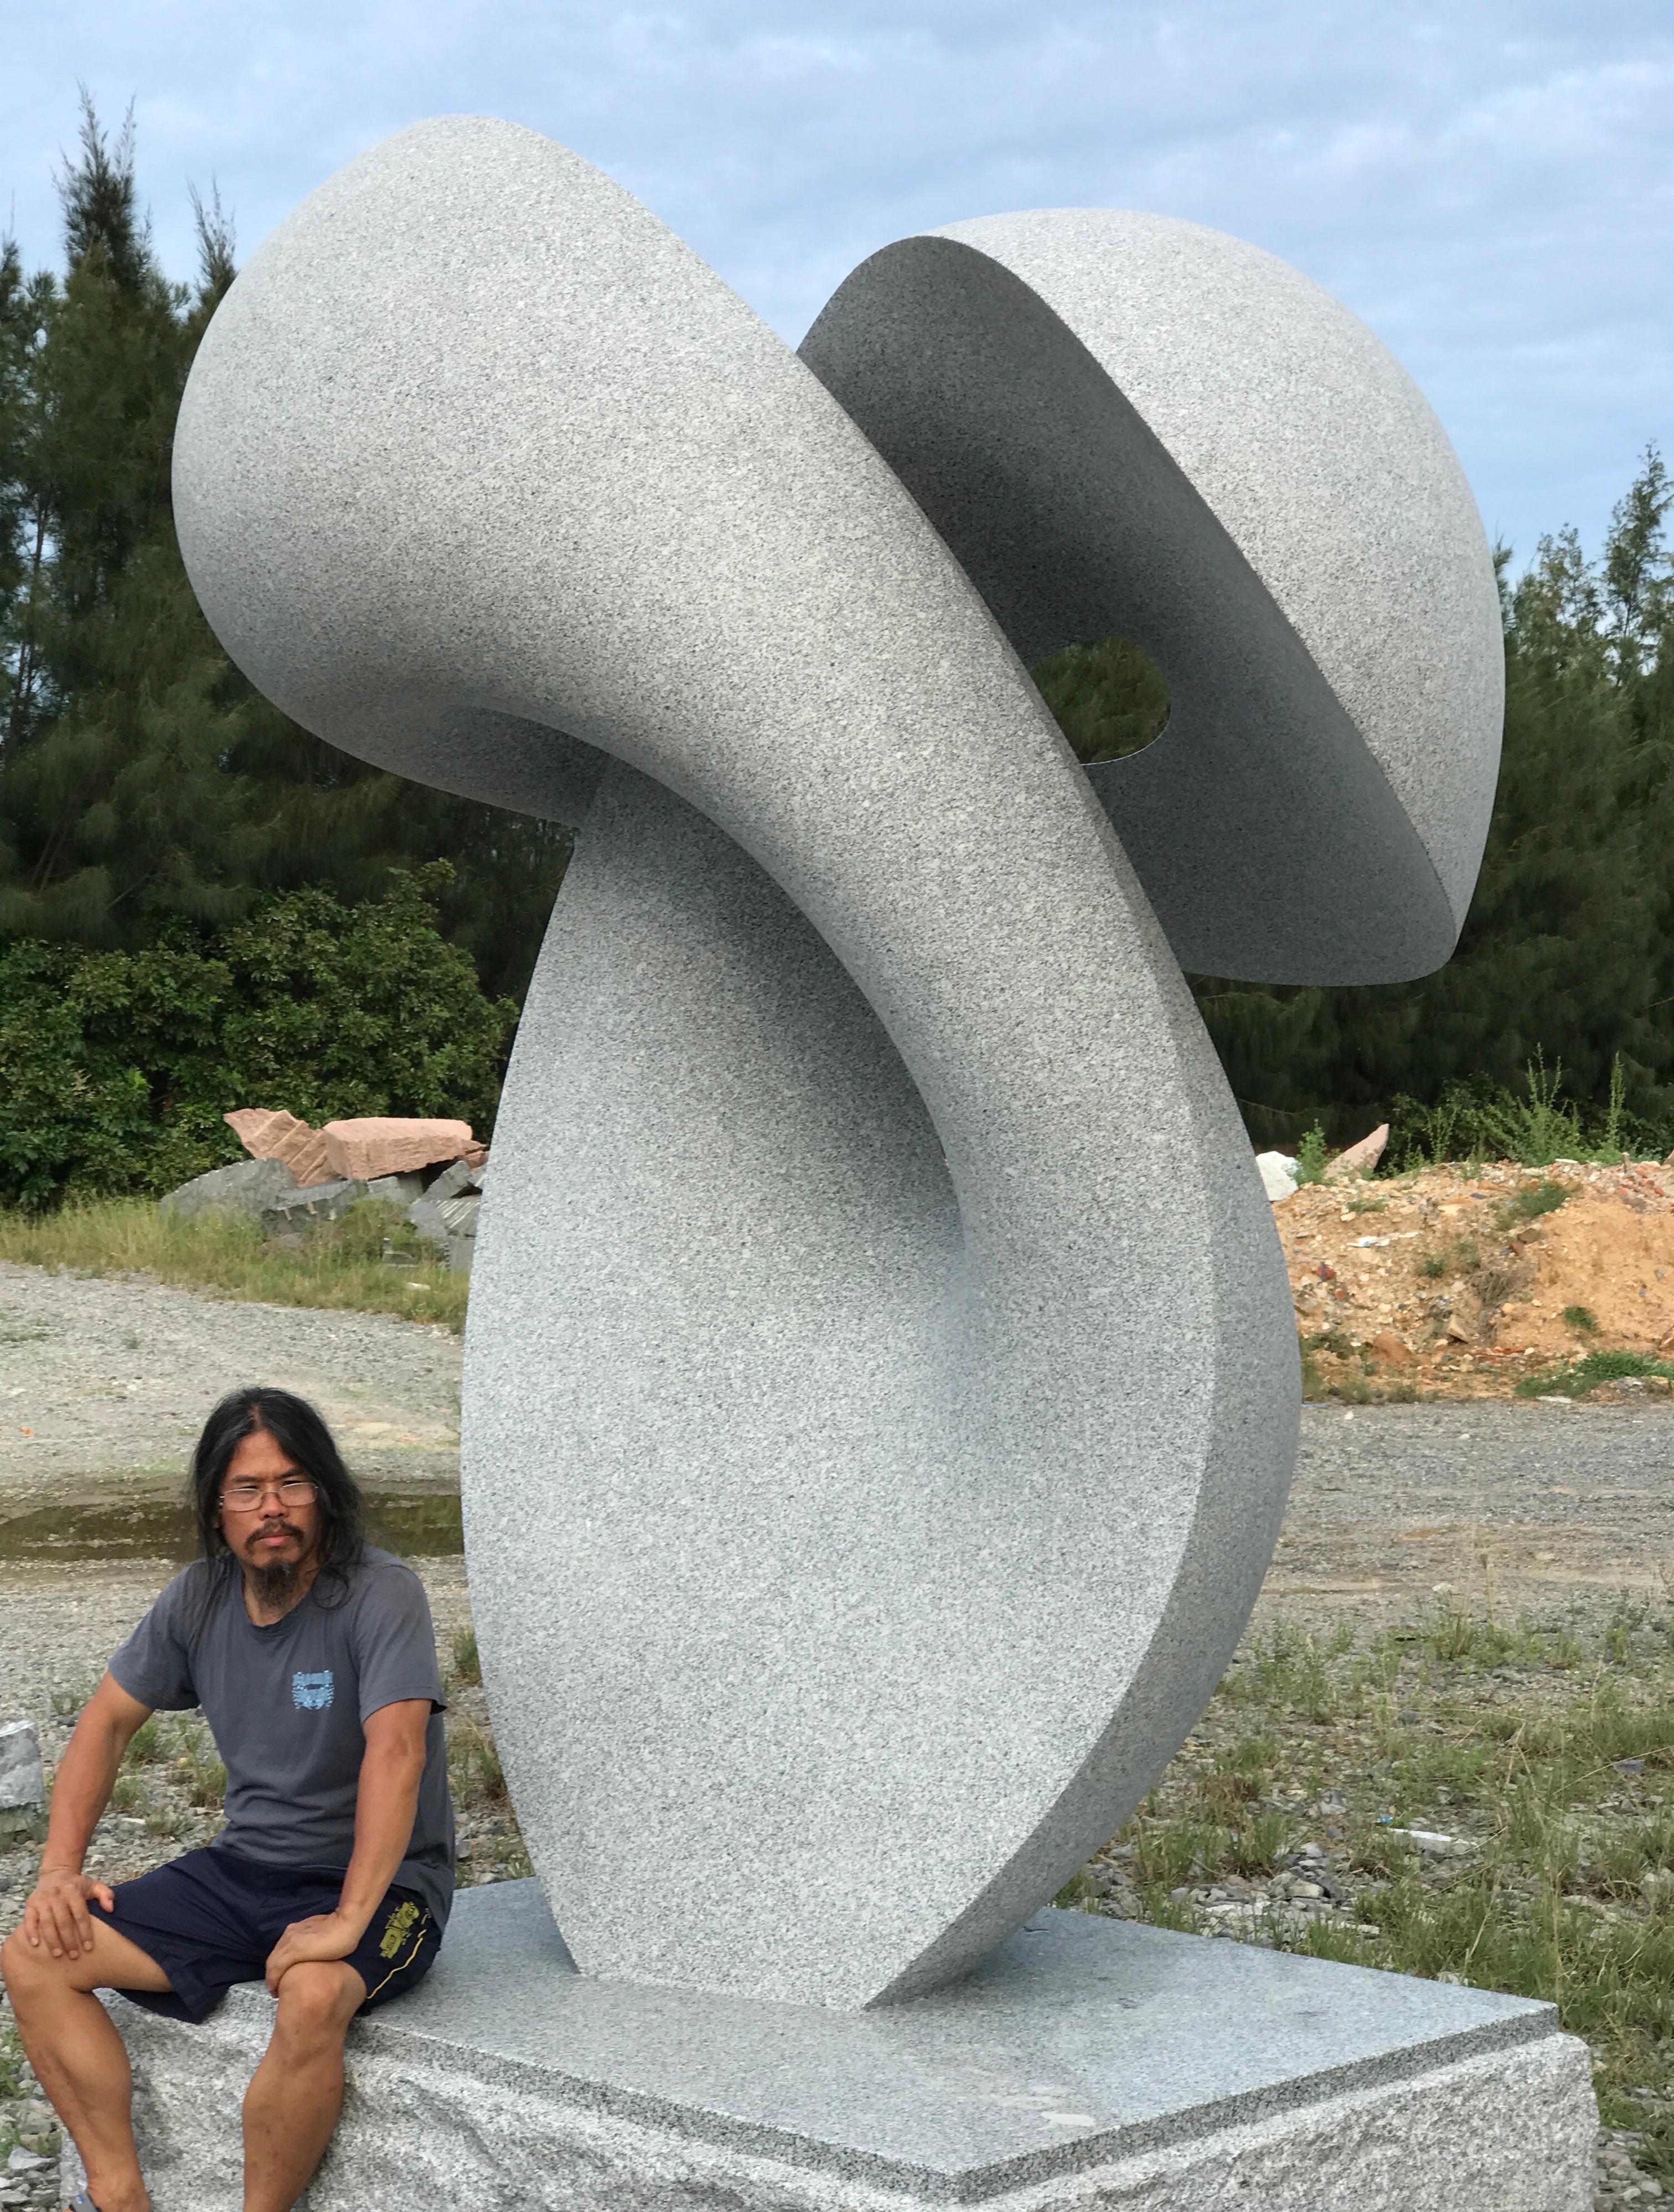 Infinity, monumental contemporary white granite sculpture by Khang Pham-New 

white granite sculpture for outdoor or indoor installation. Sculpture garden ready with a connected base. Granite is durable and easy to care for and can withstand all